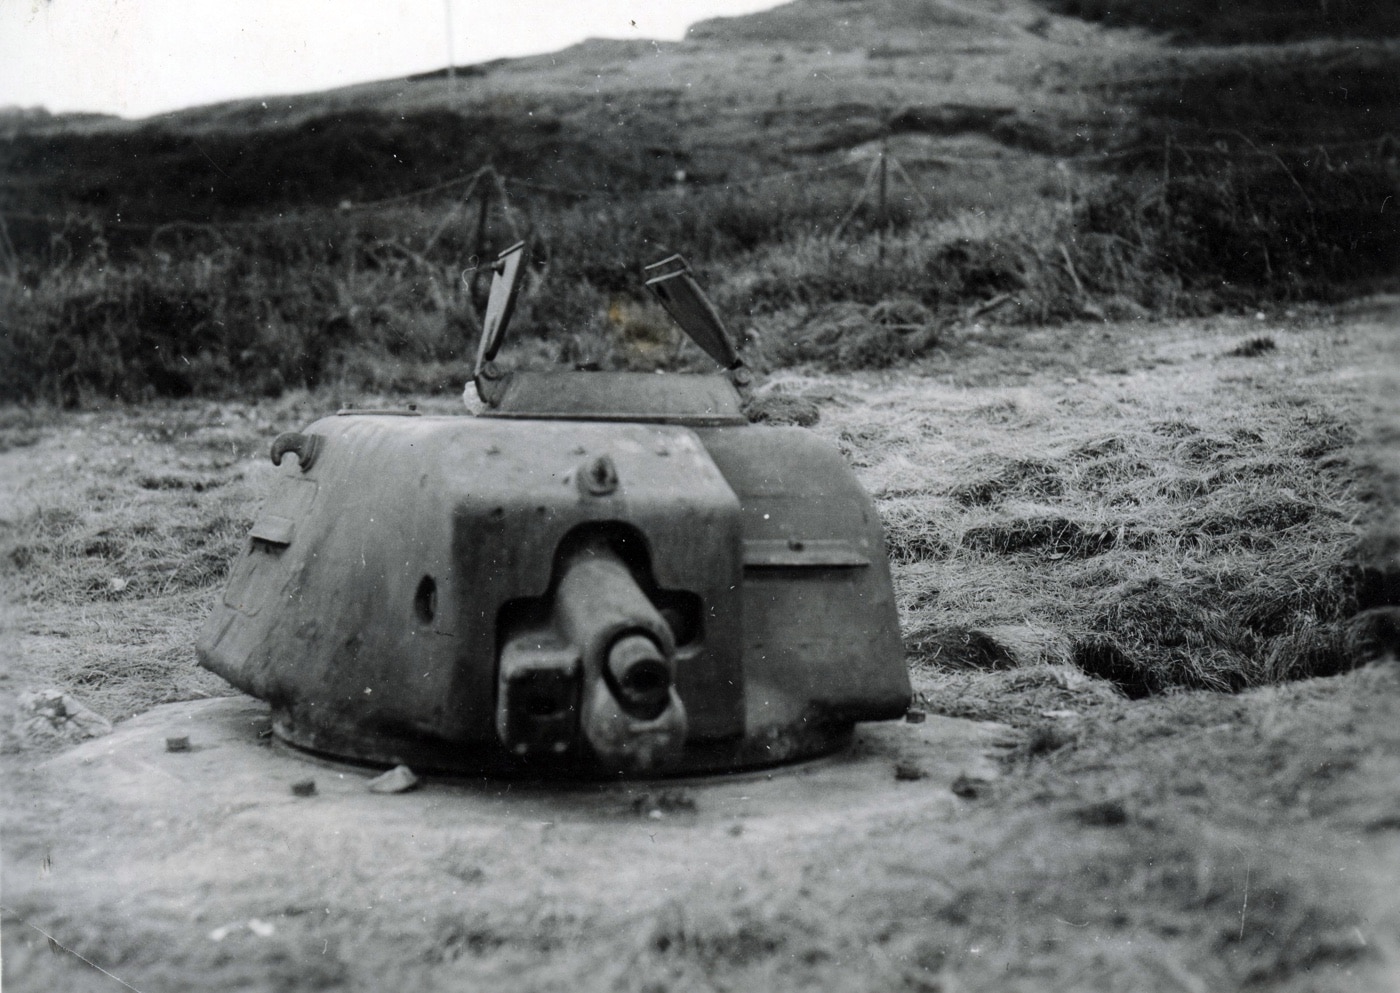 This photo shows a German bunker using Renault R-35 tank turret. These were effective, but not mobile.